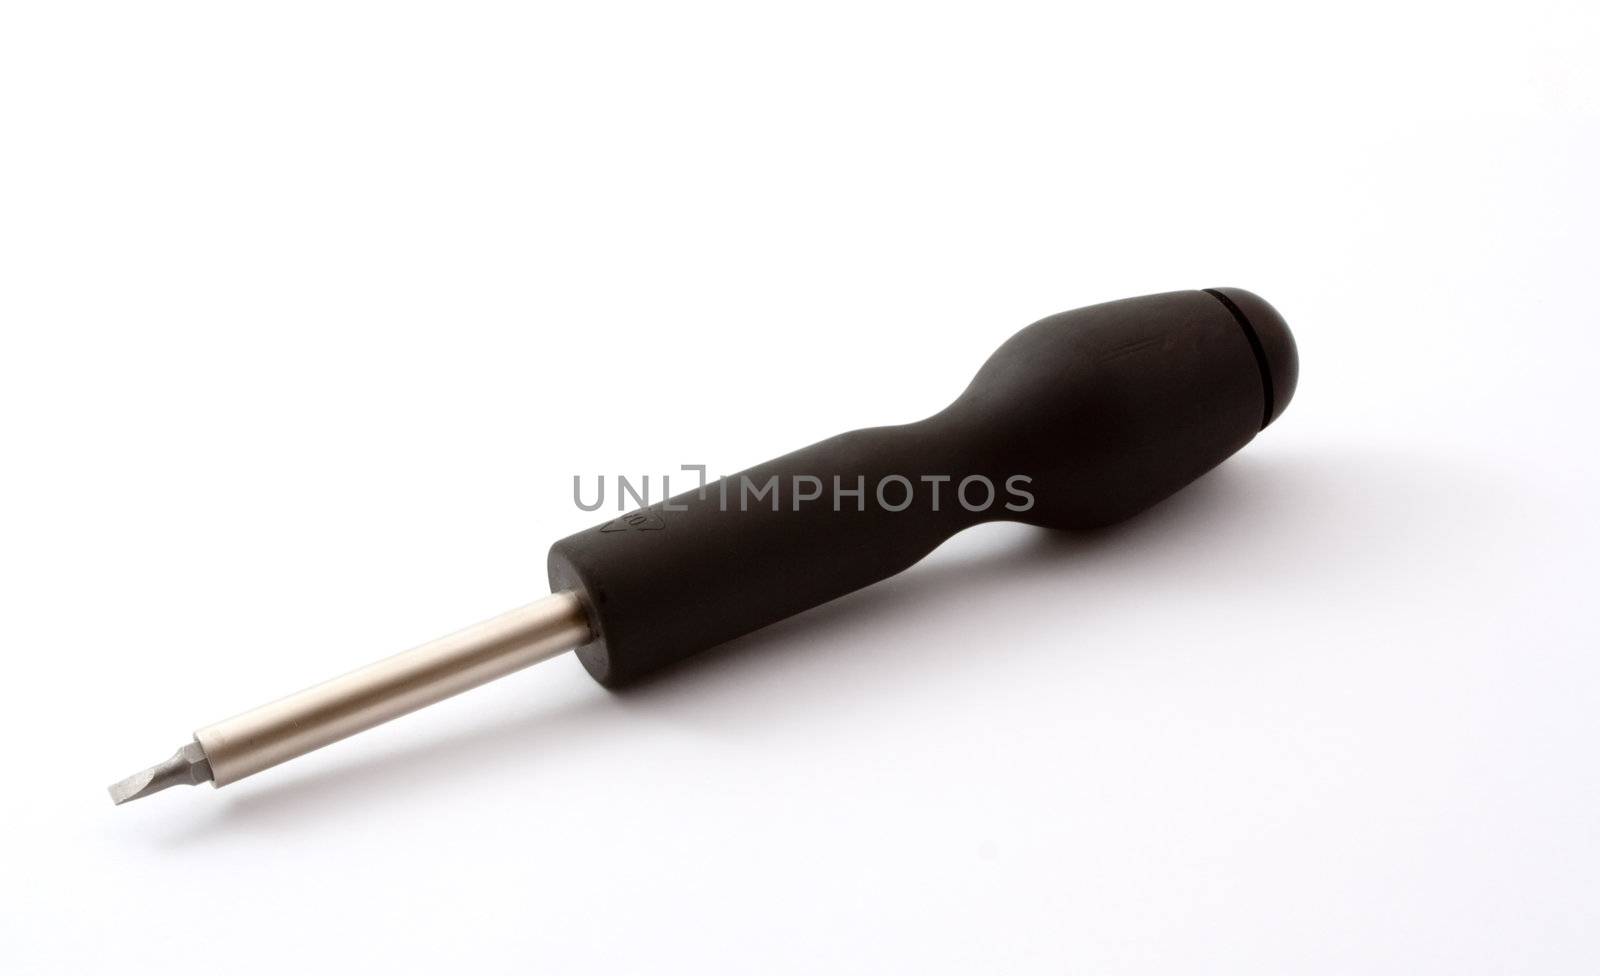 screwdriver with a replaceable tip on a white background